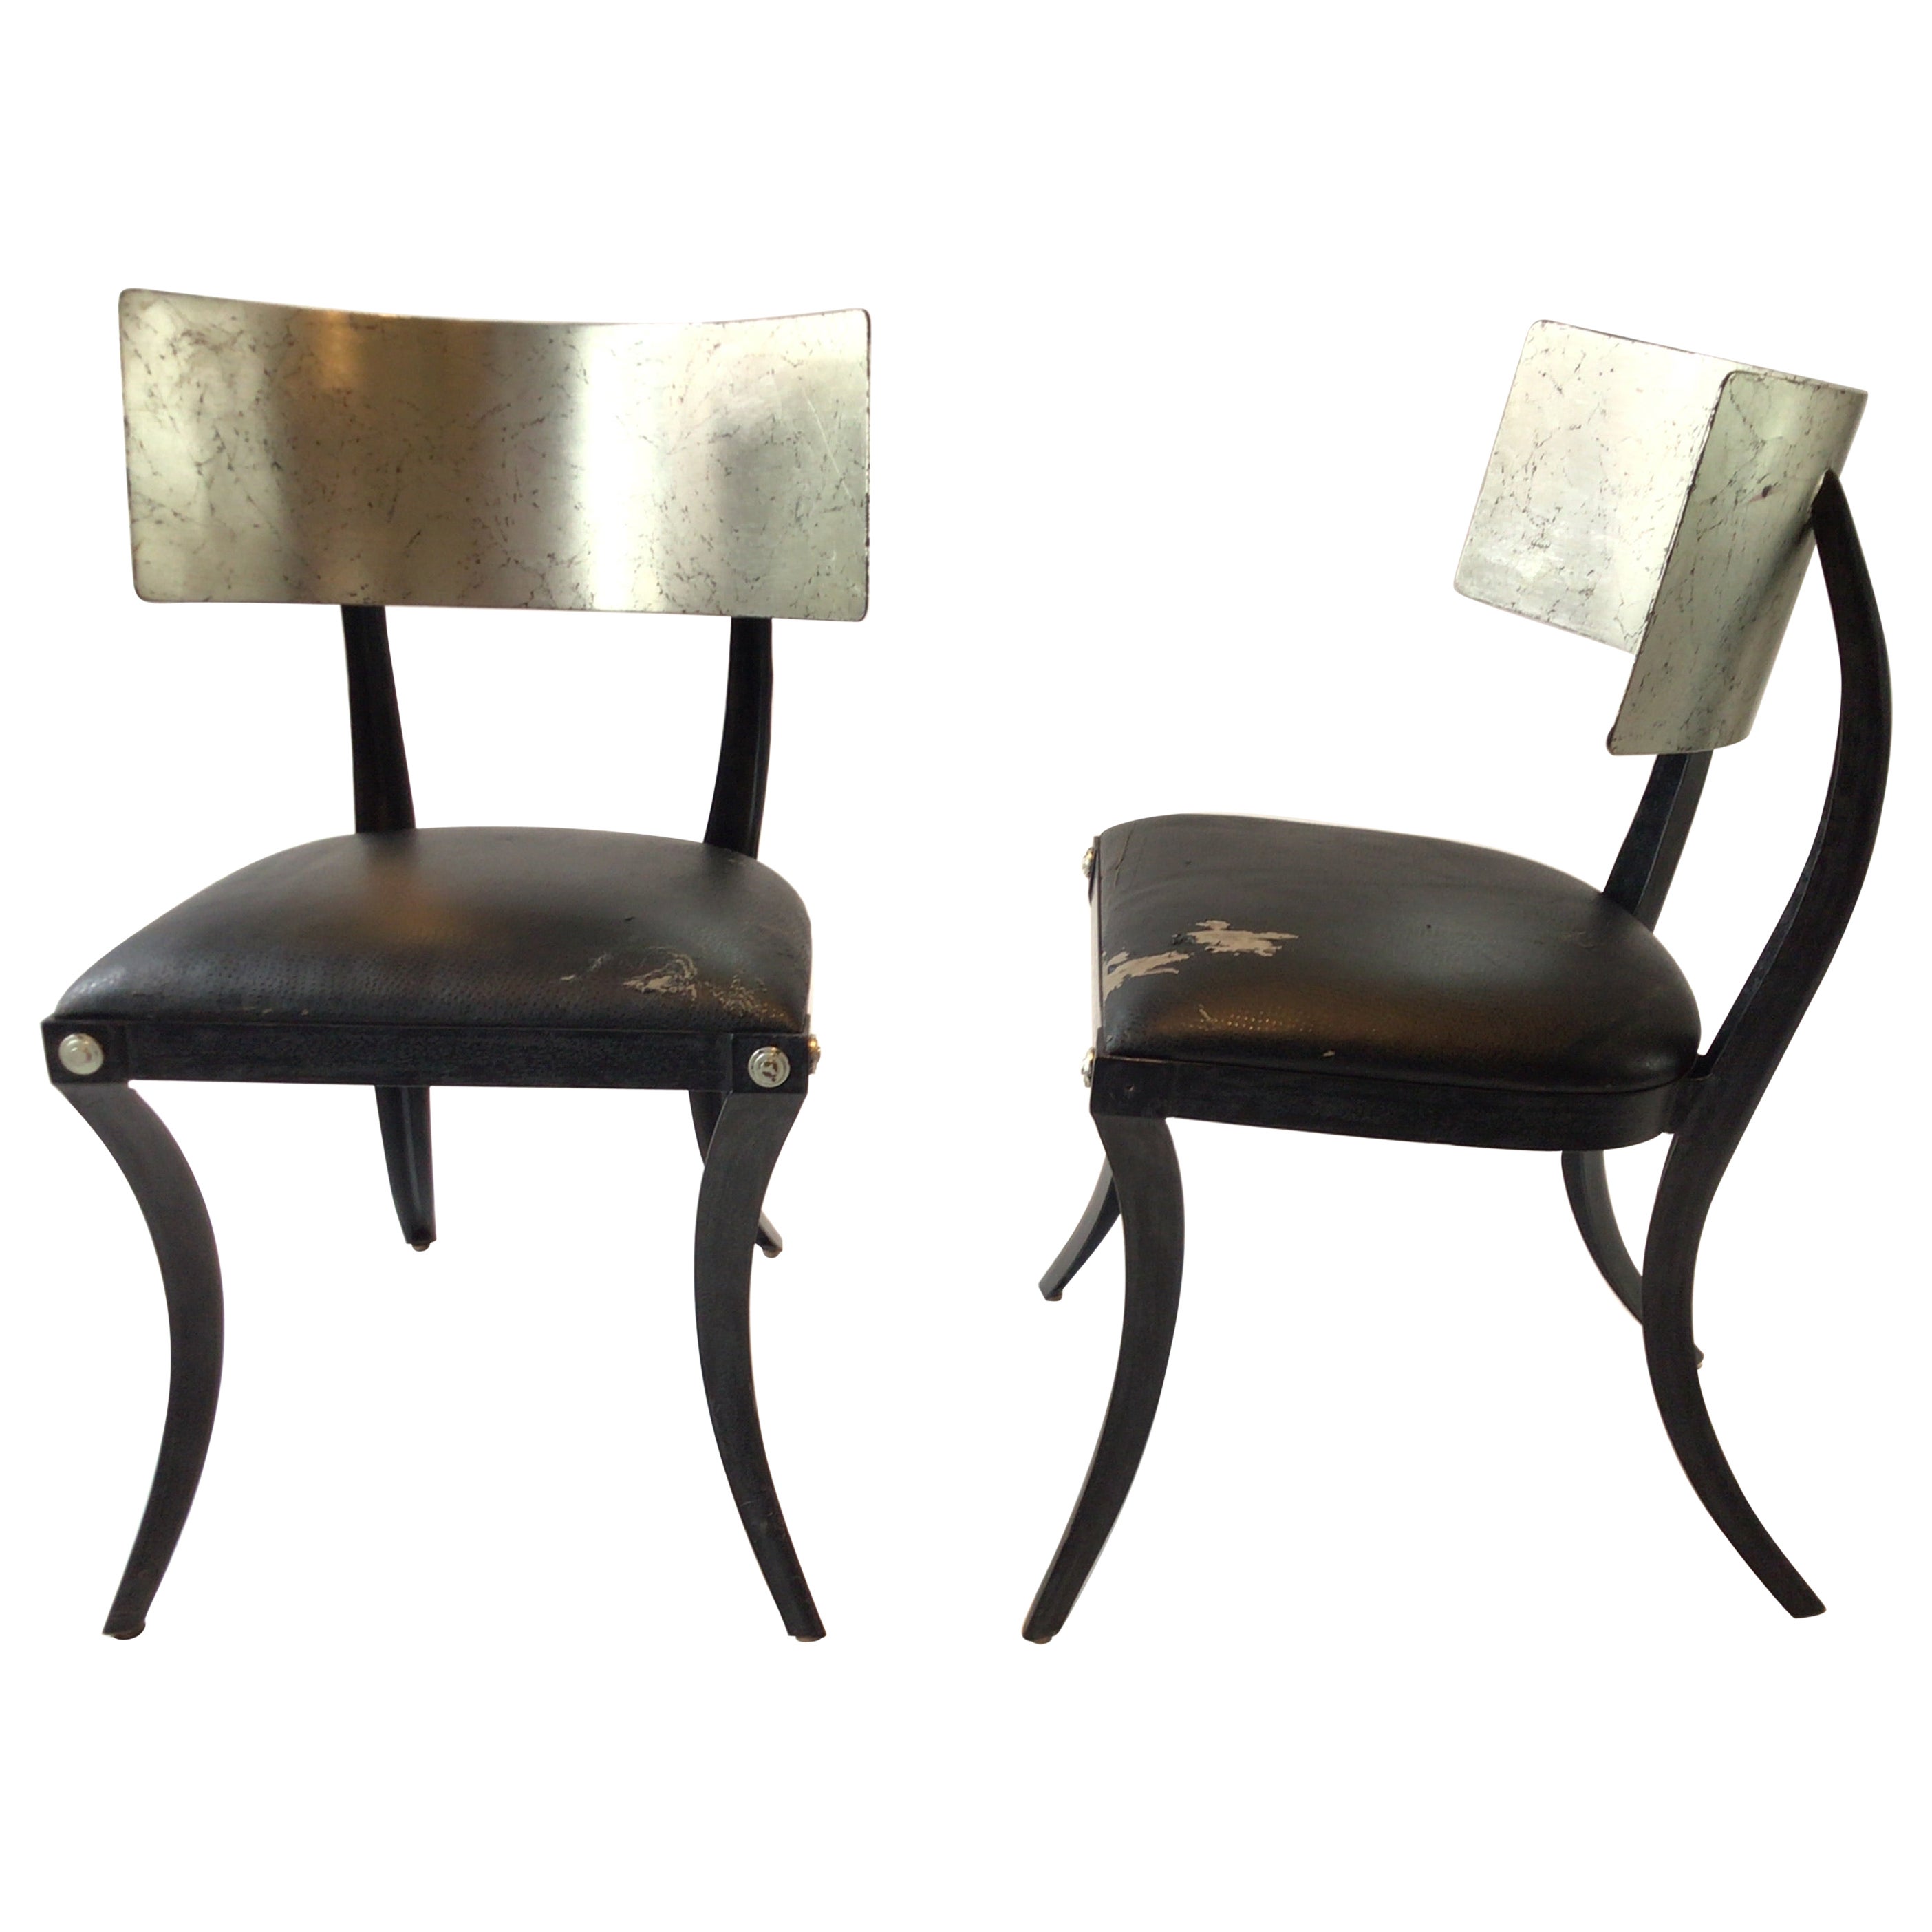 Pair of Silver Leaf Iron Klismos Chairs by Wicker Works